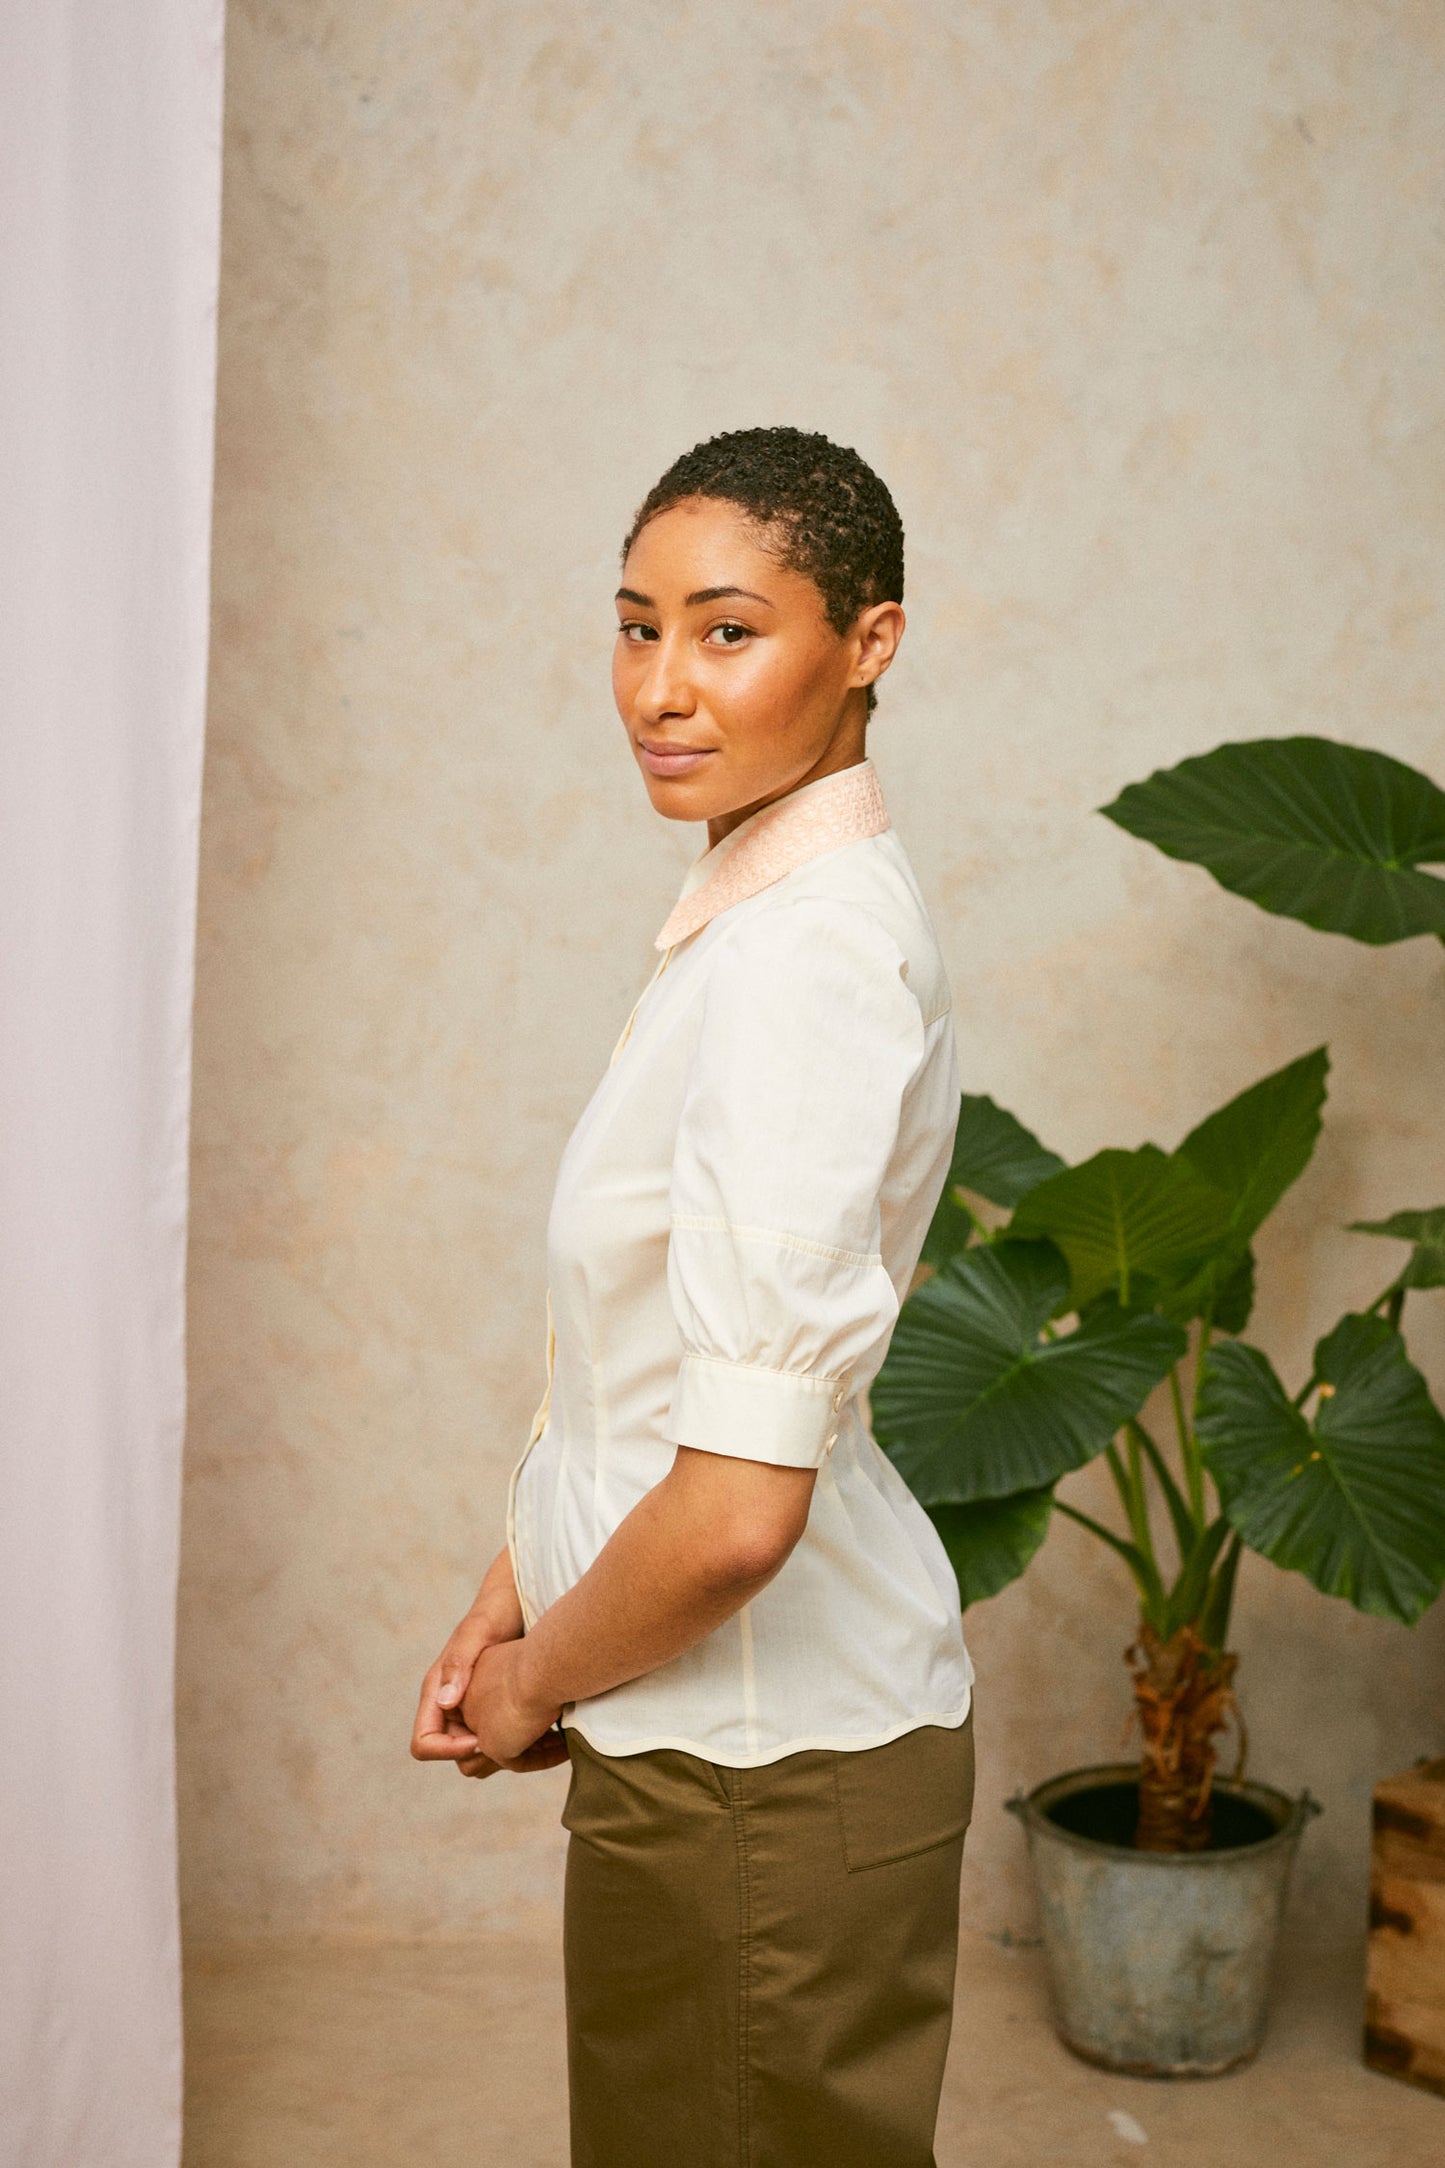 Profile view of model wearing Saywood's pastel yellow Joni puff sleeve blouse with orange lace collar and scalloped hem. Worn with khaki Amelia wide leg trousers. A plant and drop of pink fabric can be seen in the background. 